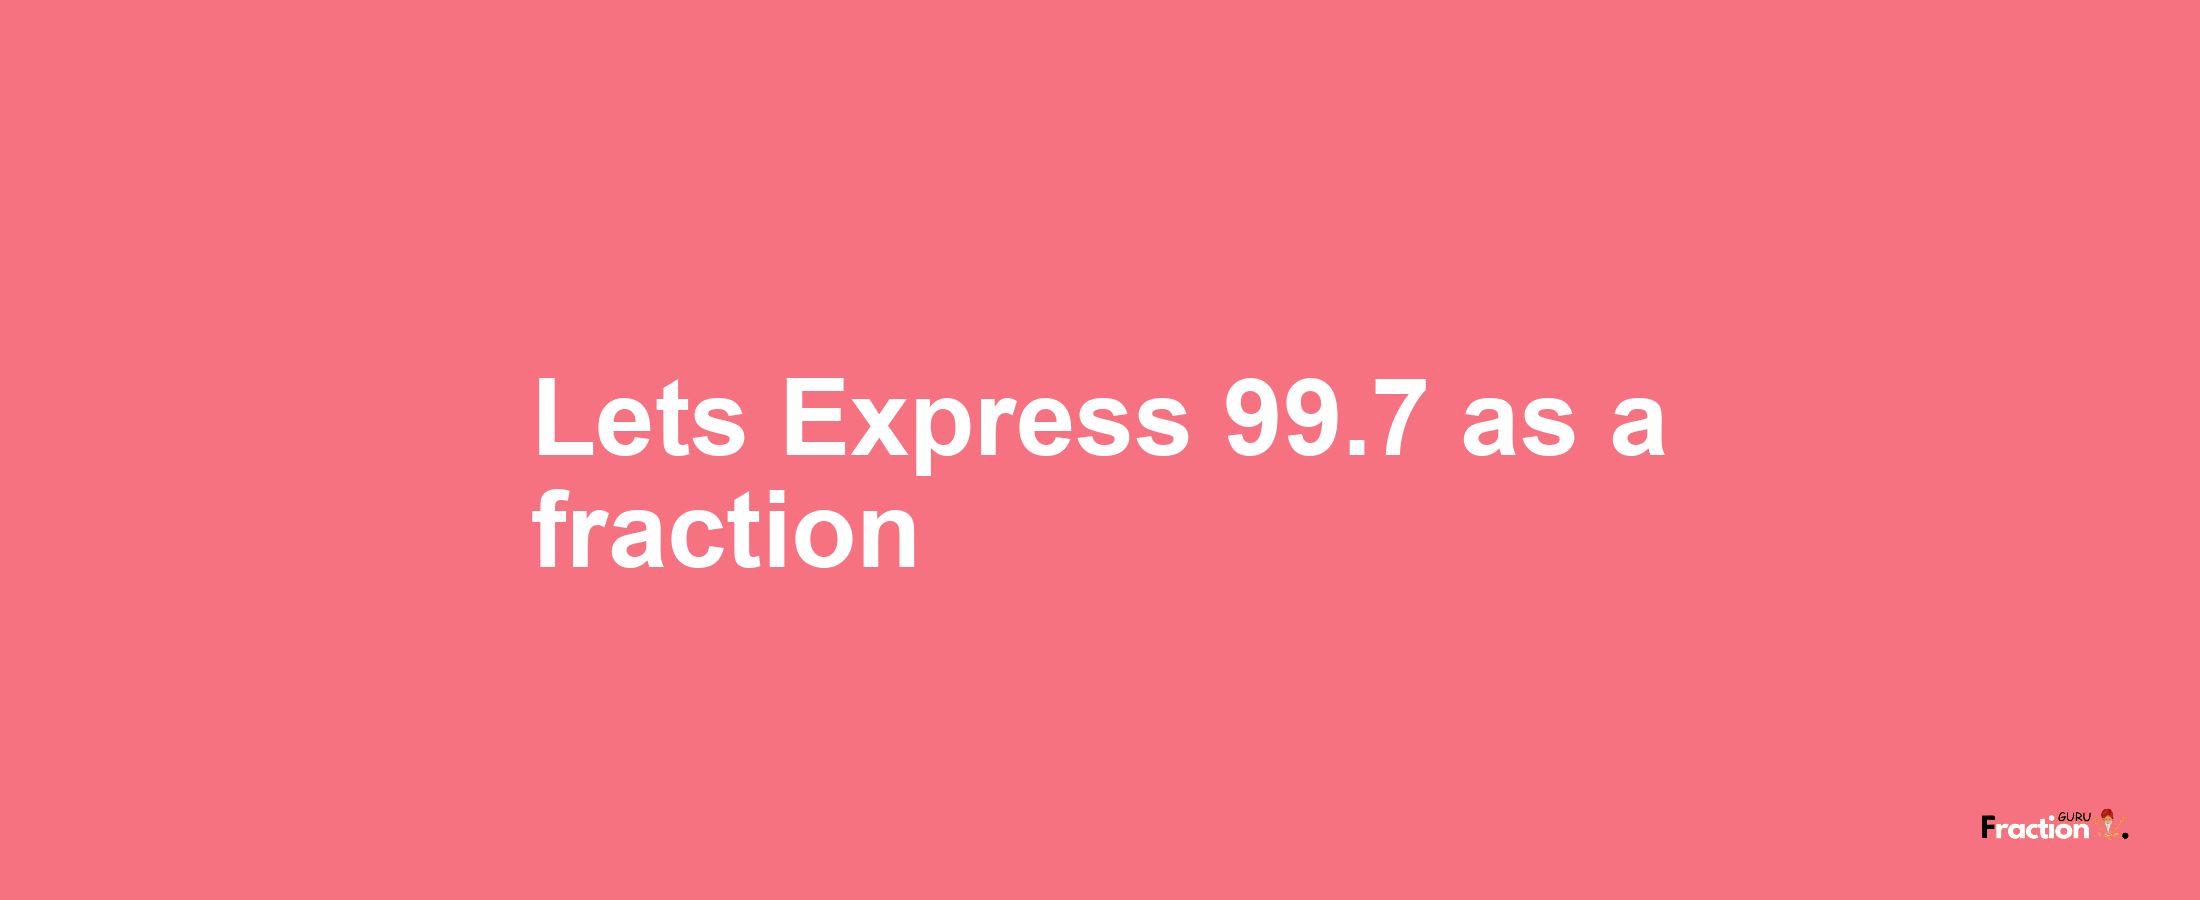 Lets Express 99.7 as afraction